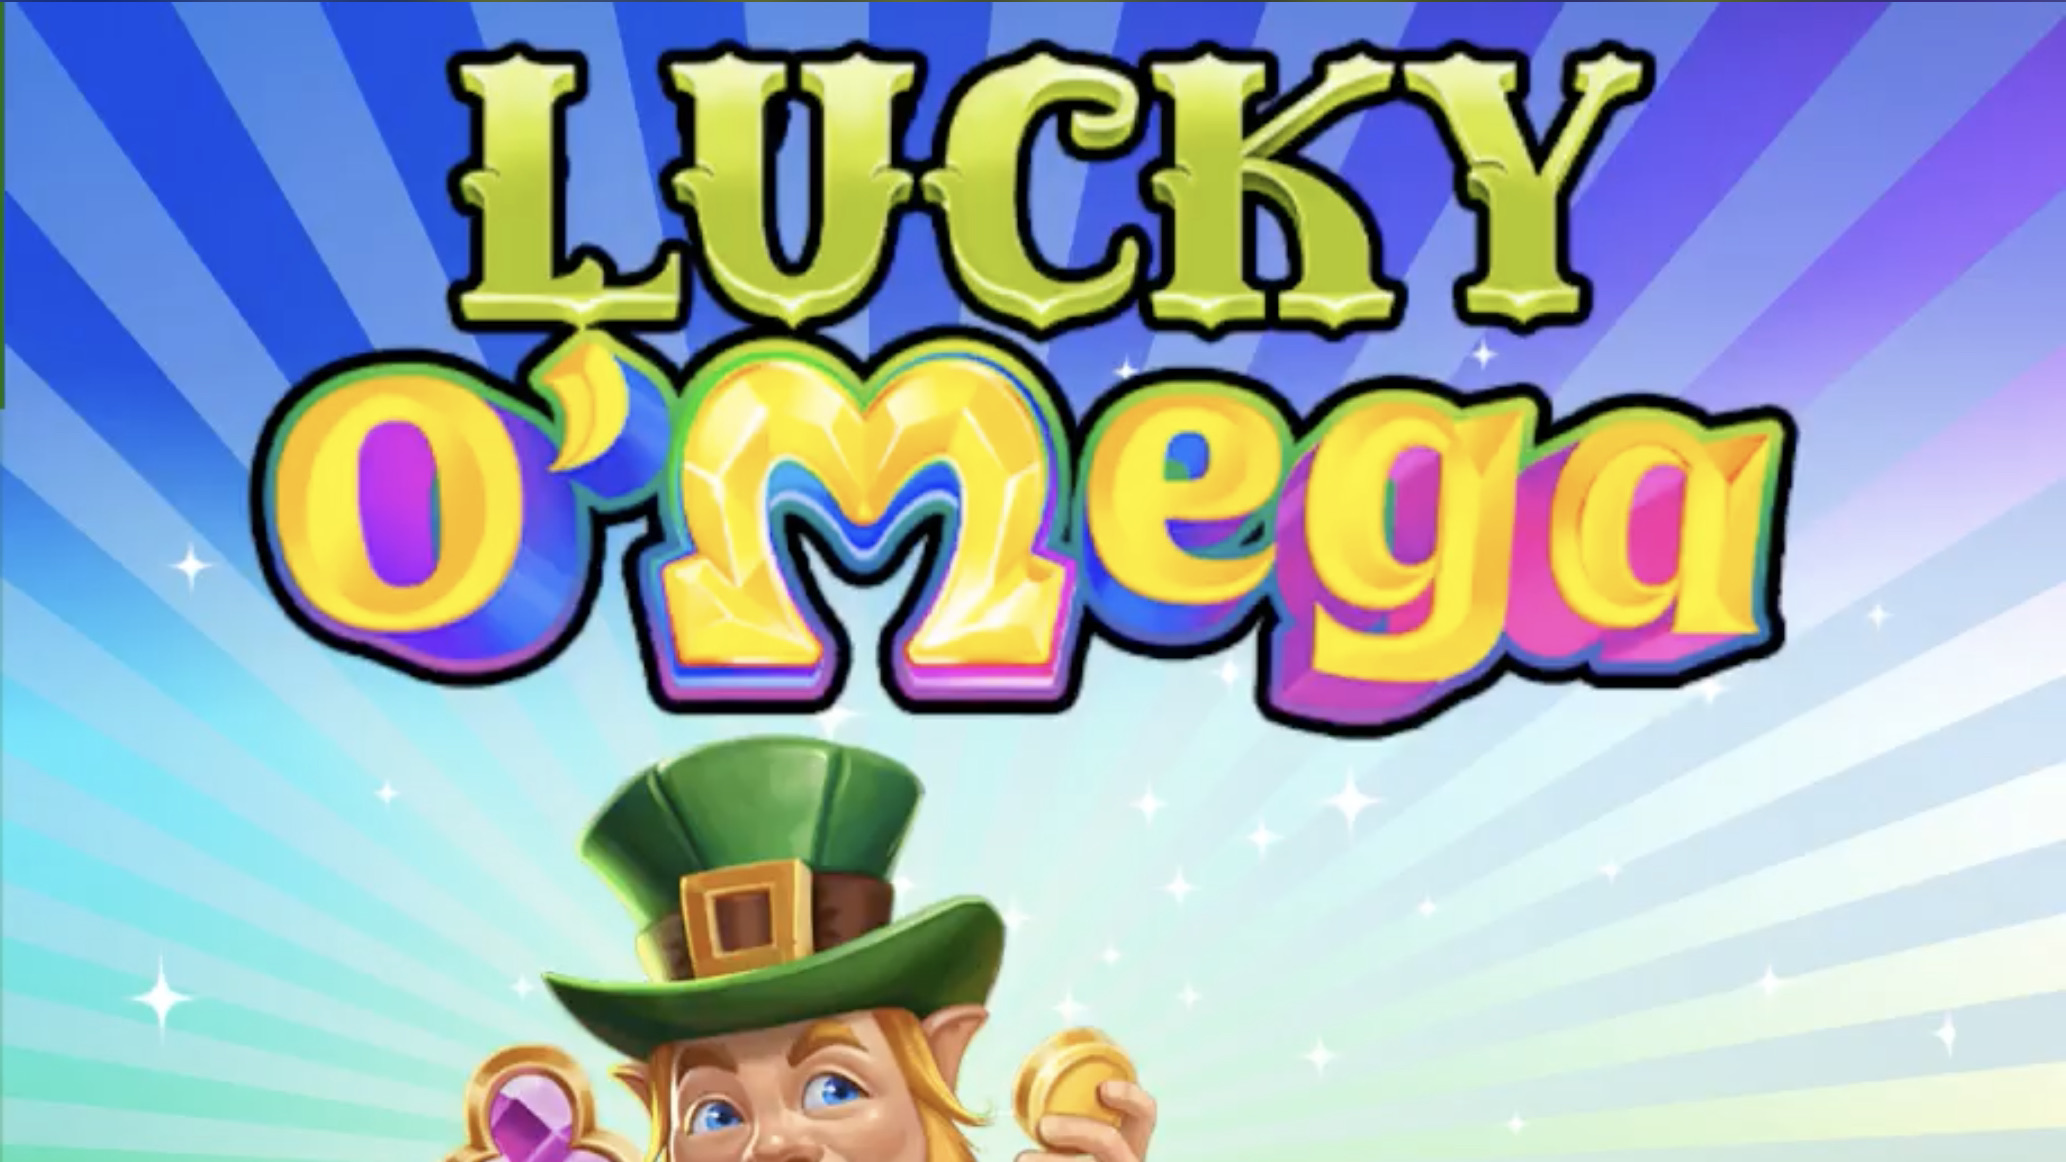 Experience the leprechaun's luck in Gong Gaming Technologies’ most recent addition to its portfolio with Lucky O’Mega.